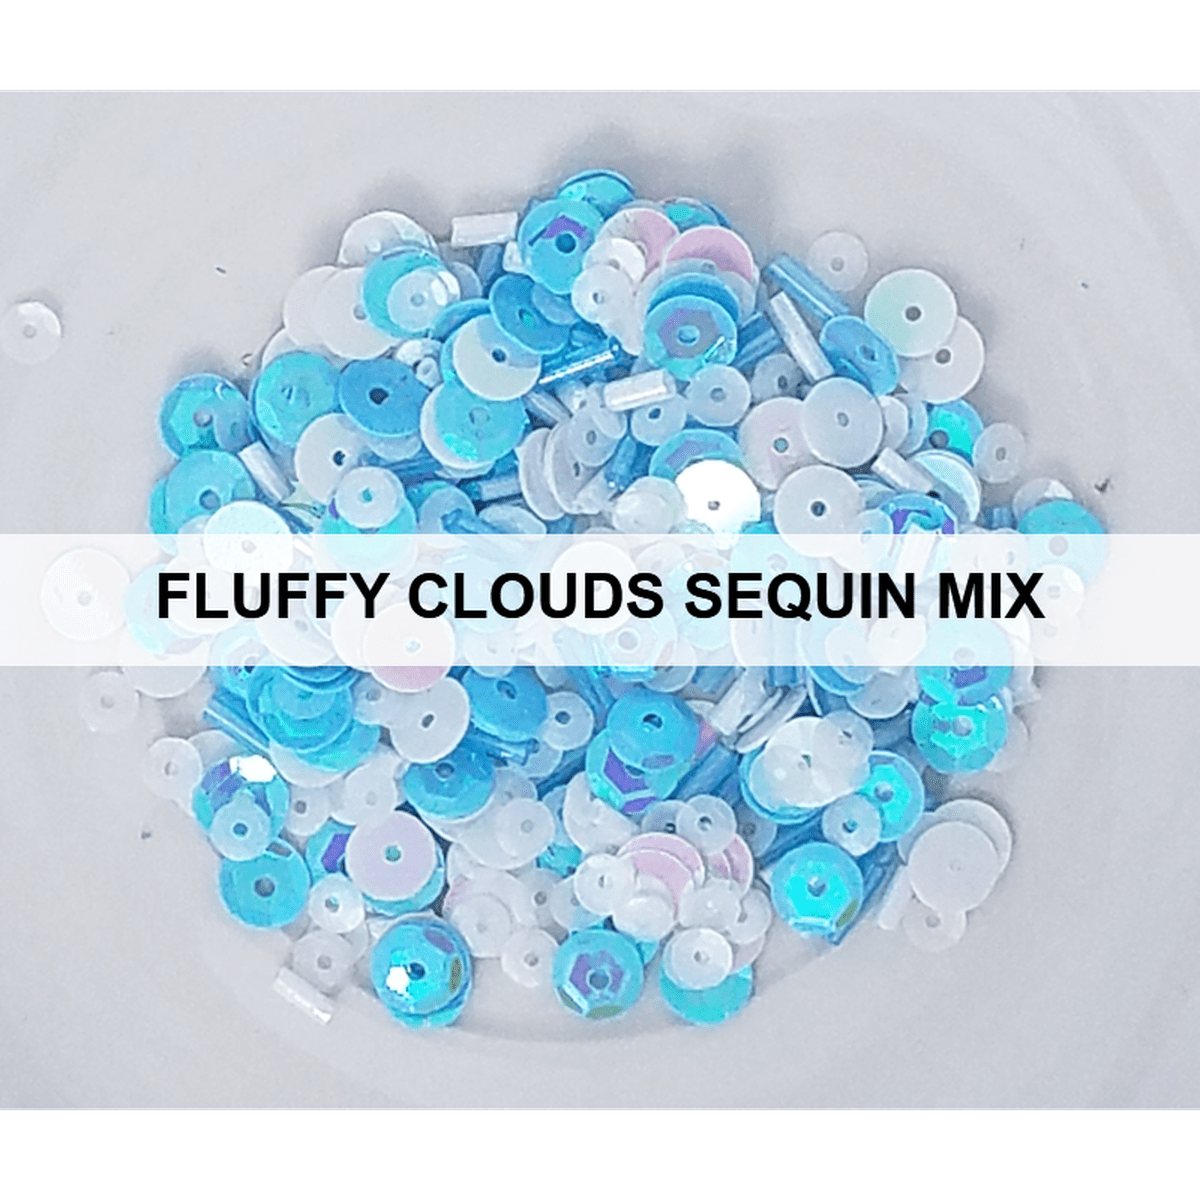 Fluffy Clouds Sequin Mix - Kat Scrappiness